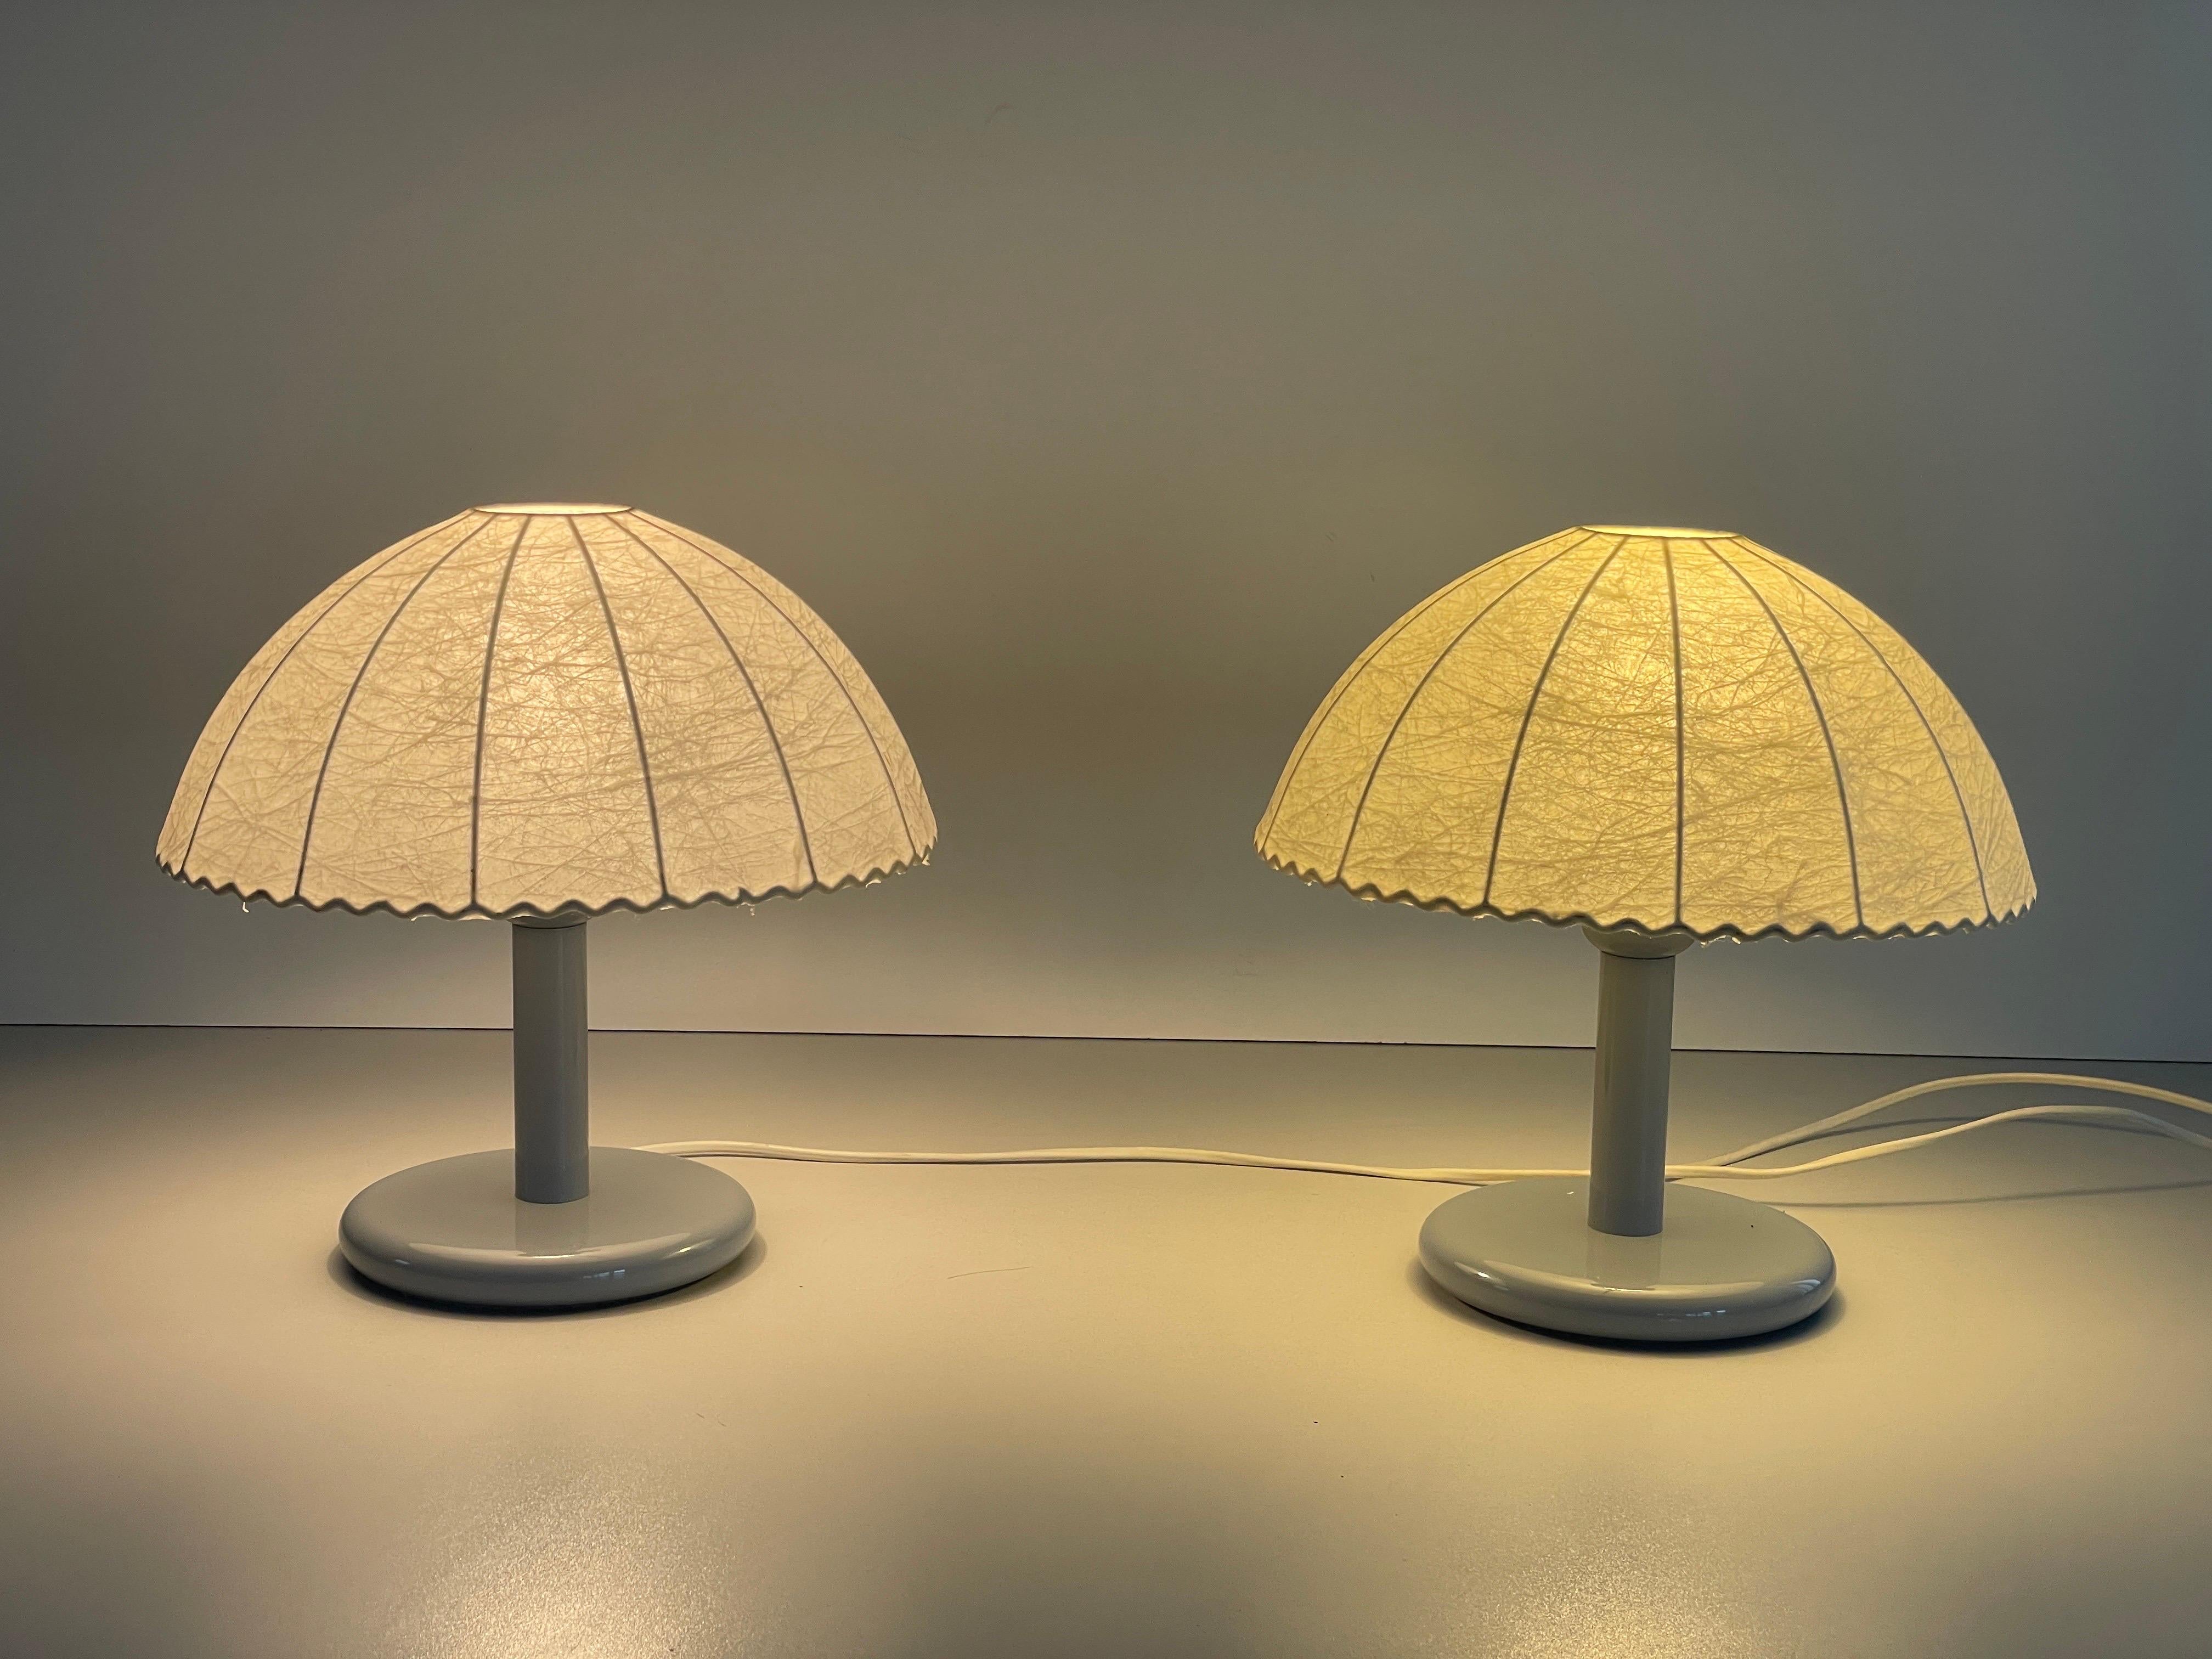 Pair of Cocoon Table Lamps with Grey Metal Base by GOLDKANT, 1960s, Germany For Sale 6